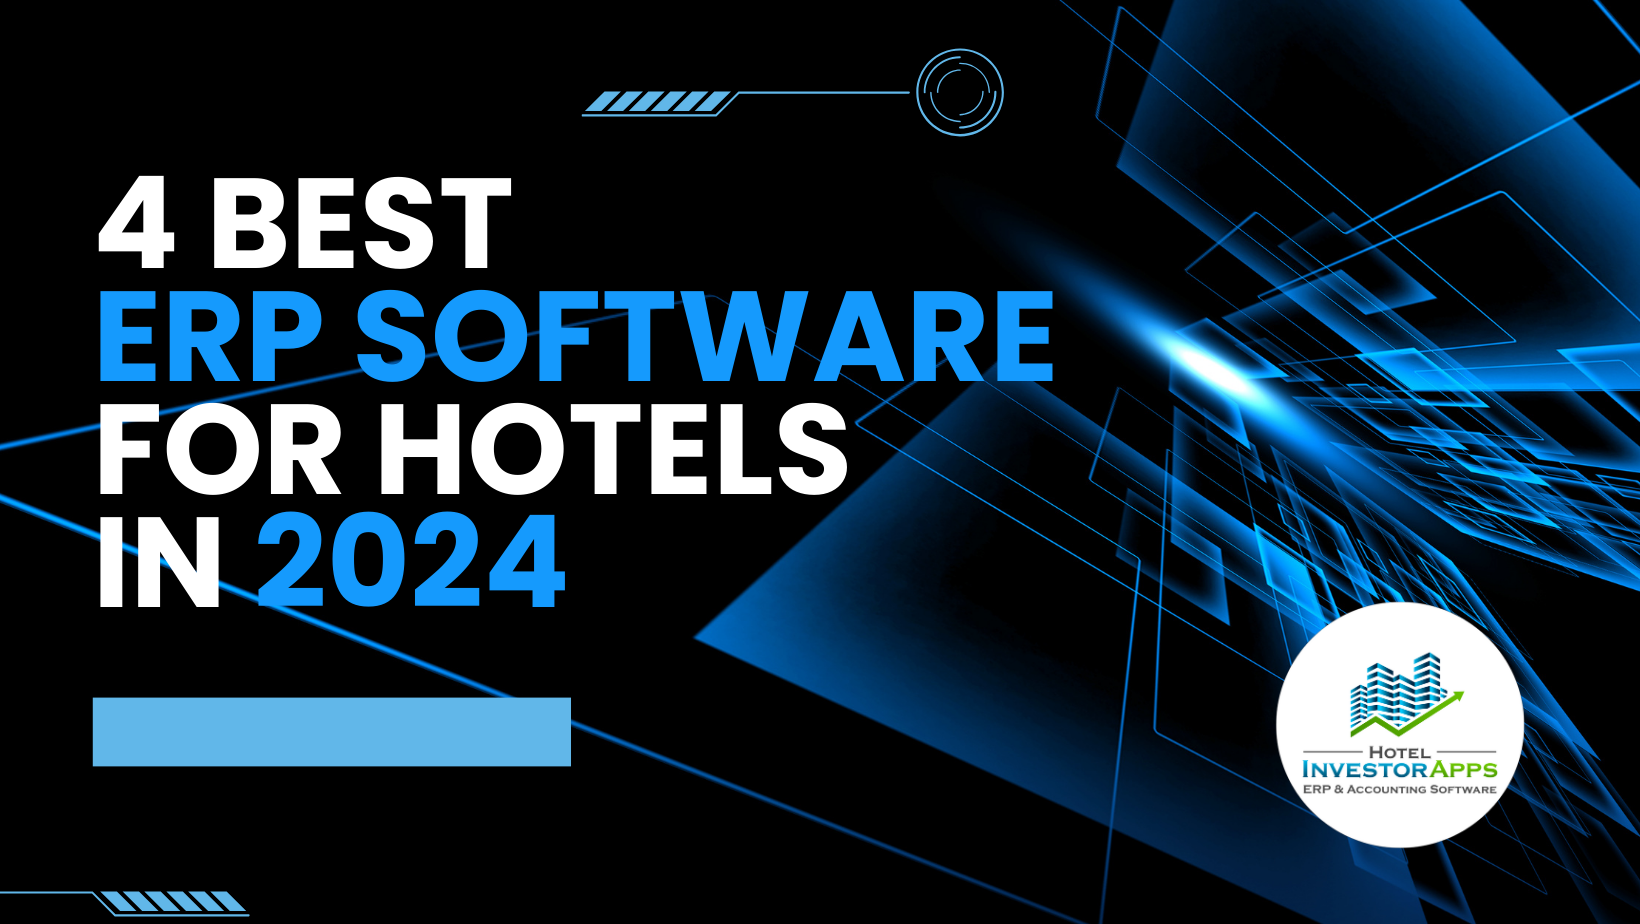 4 Best ERP Software for Hotels in 2024